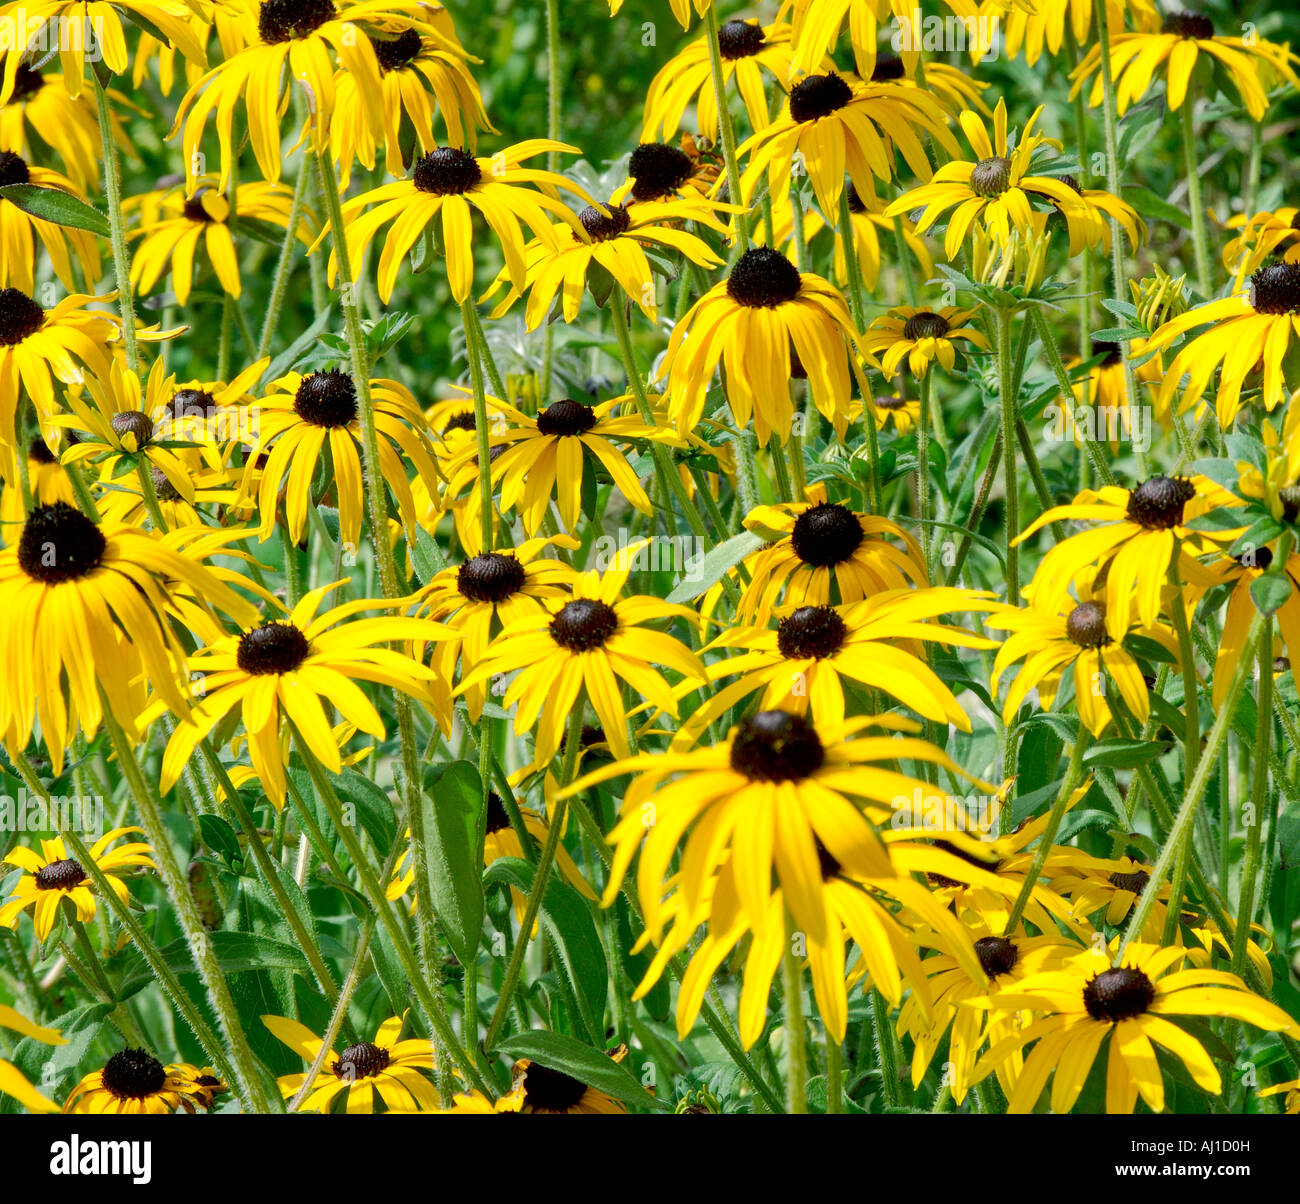 Large group of Rudbeckia or Black eyed susan flowers in a herbaceous border on a bright sunny day Stock Photo